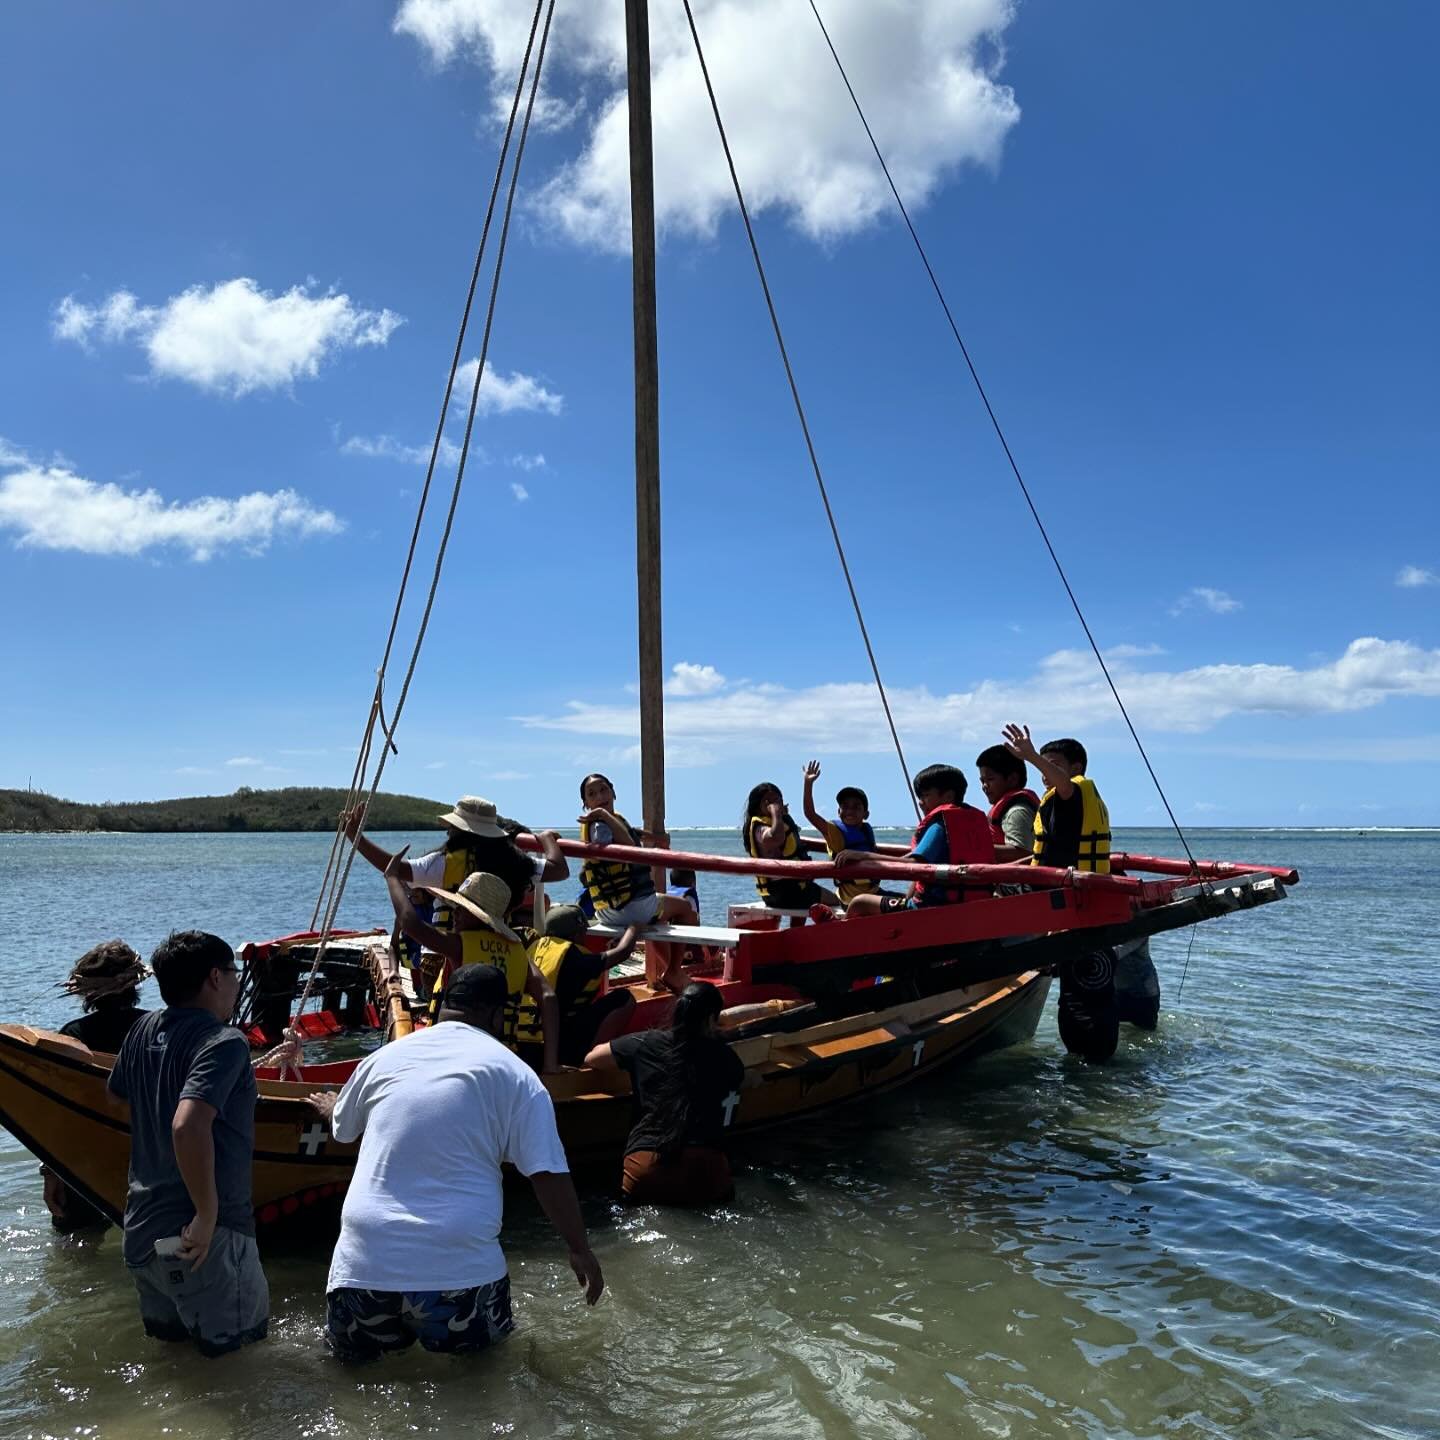 🌊⛵On Saturday, we had the honour of working with Pairourou Larry Raigetal to host a canoe building workshop, &ldquo;Fanuen mwir | your land of stern: wayfinding in contemporary Micronesia,&rdquo; as part of our Art+Ideas program. The workshop took p